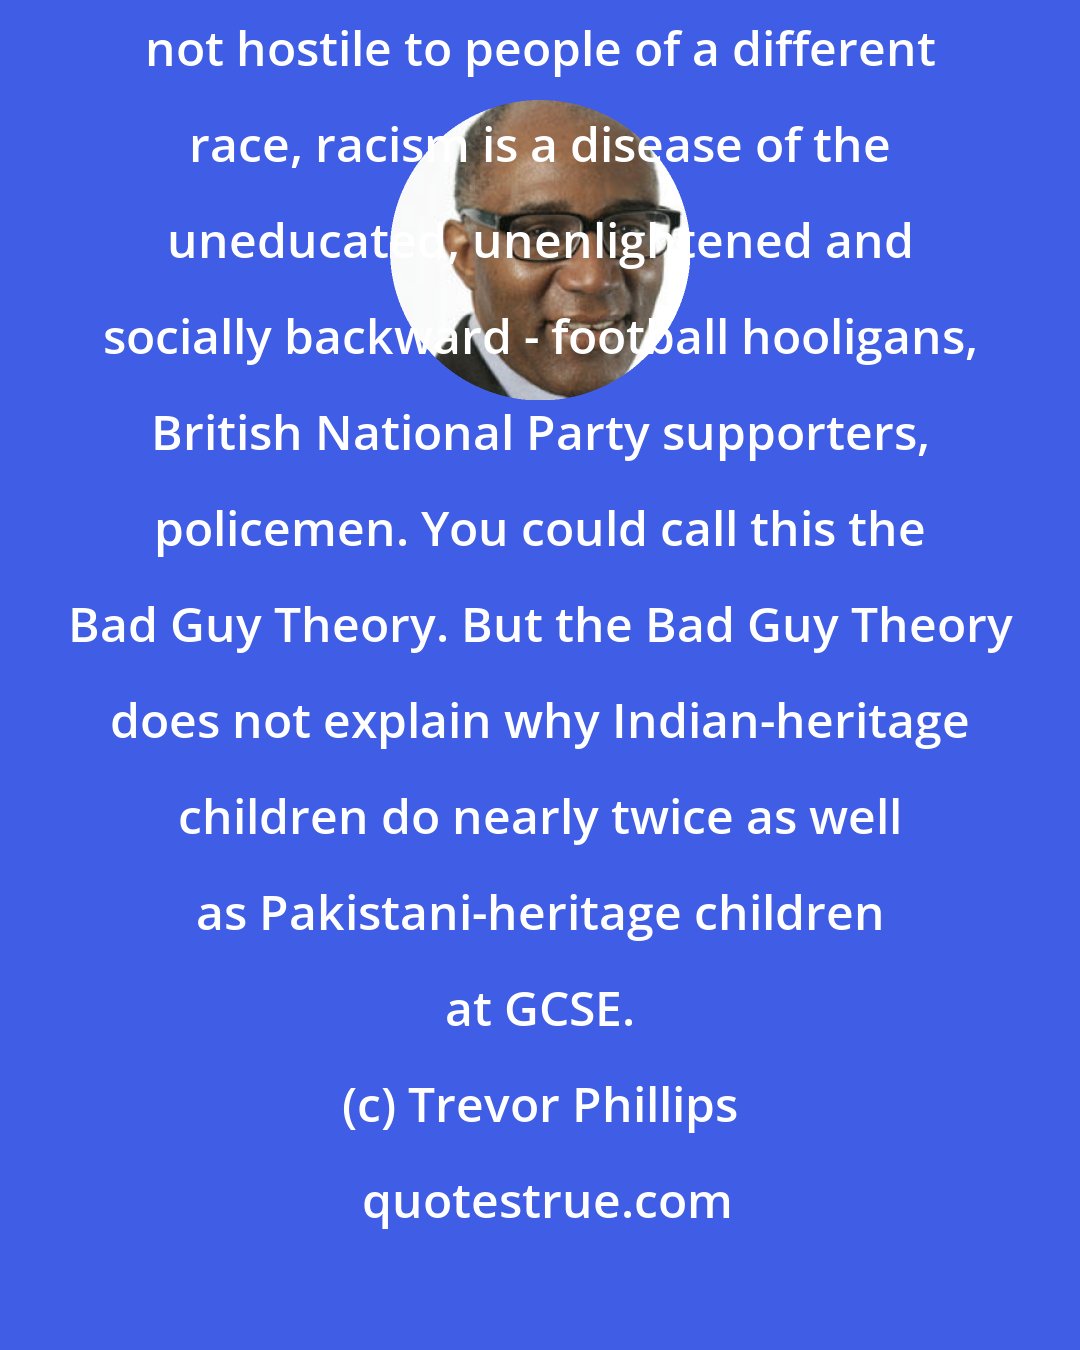 Trevor Phillips: Most liberal-minded folk would like to think that since they are not hostile to people of a different race, racism is a disease of the uneducated, unenlightened and socially backward - football hooligans, British National Party supporters, policemen. You could call this the Bad Guy Theory. But the Bad Guy Theory does not explain why Indian-heritage children do nearly twice as well as Pakistani-heritage children at GCSE.